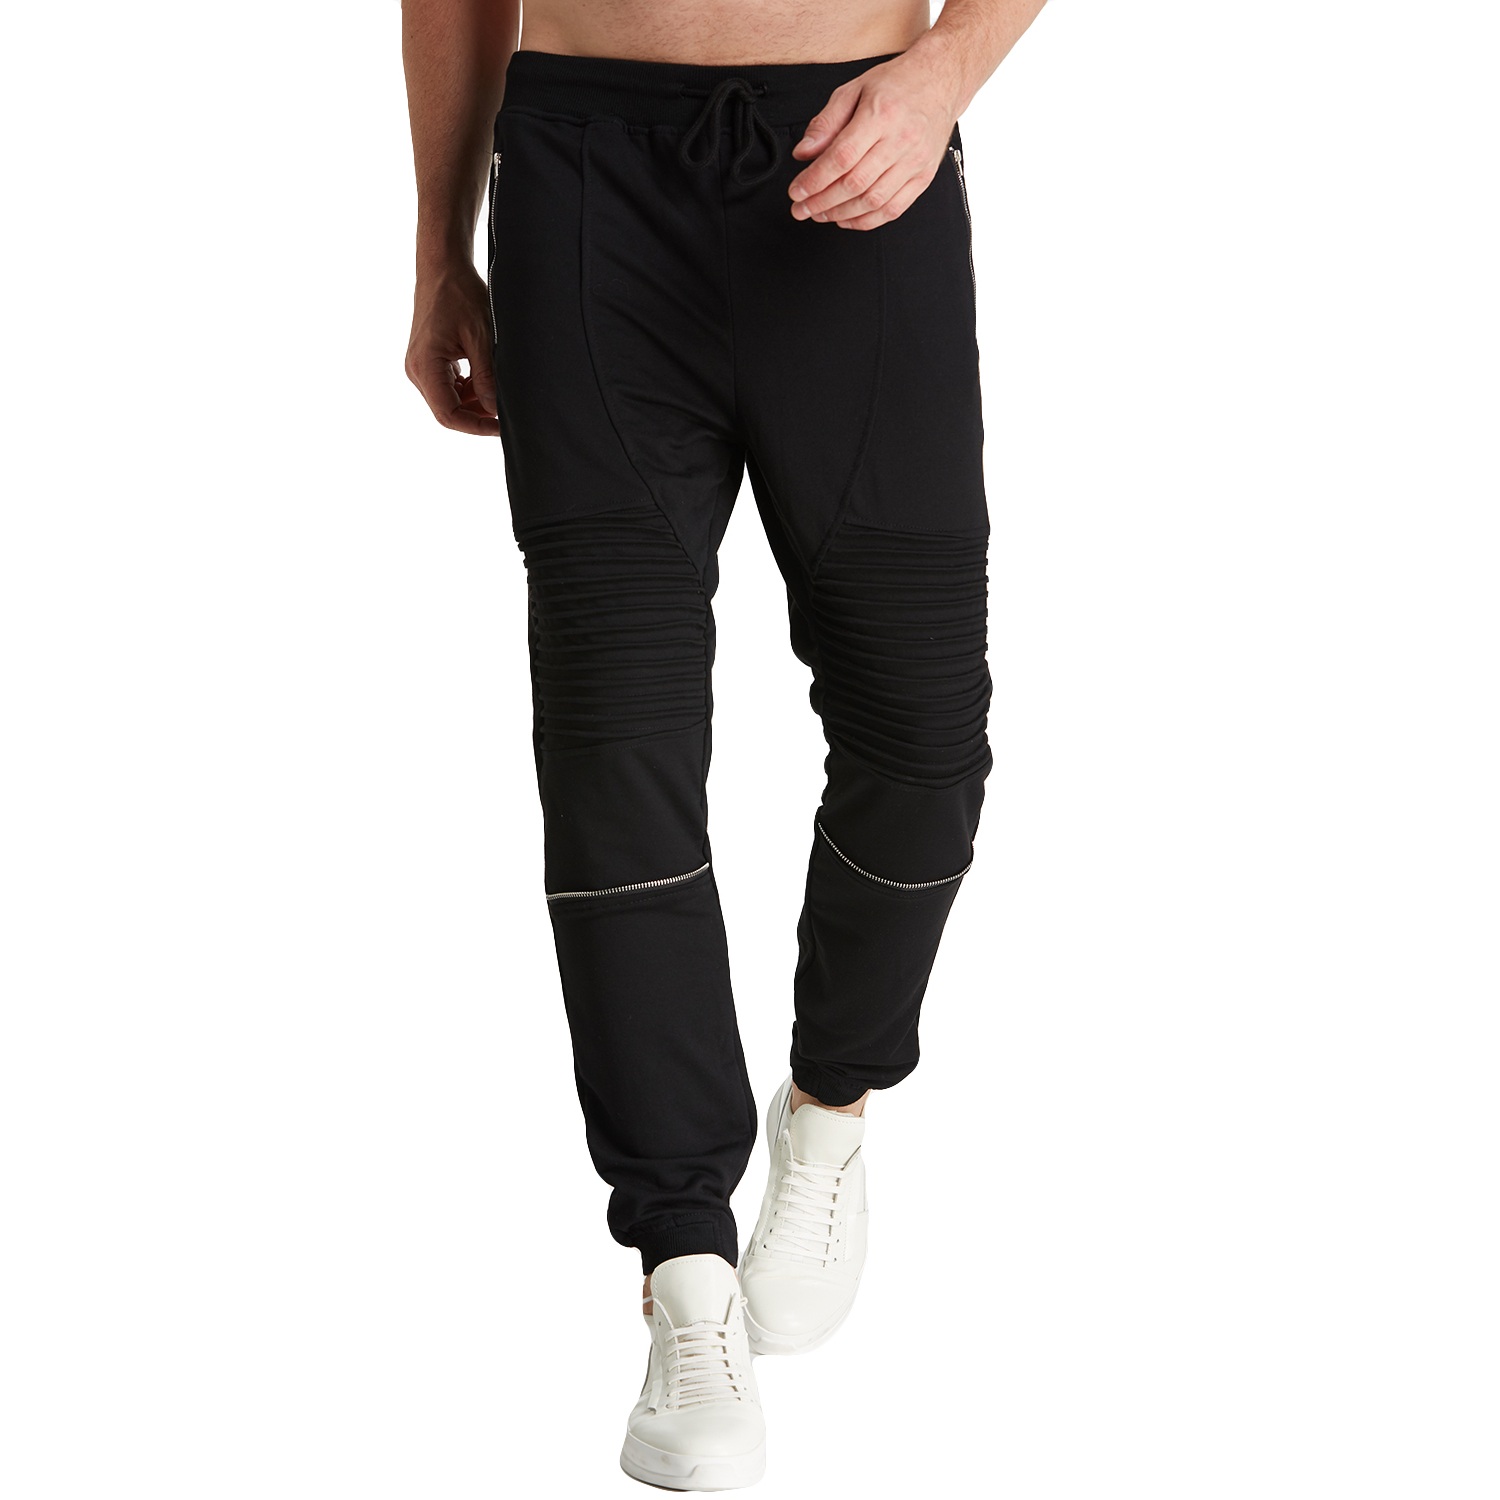 Mens-Yoga-Fitness-Sports-Pants-Wearable-Breathable-Keep-Warm-Outdoor-Sports-Pants-1550391-3